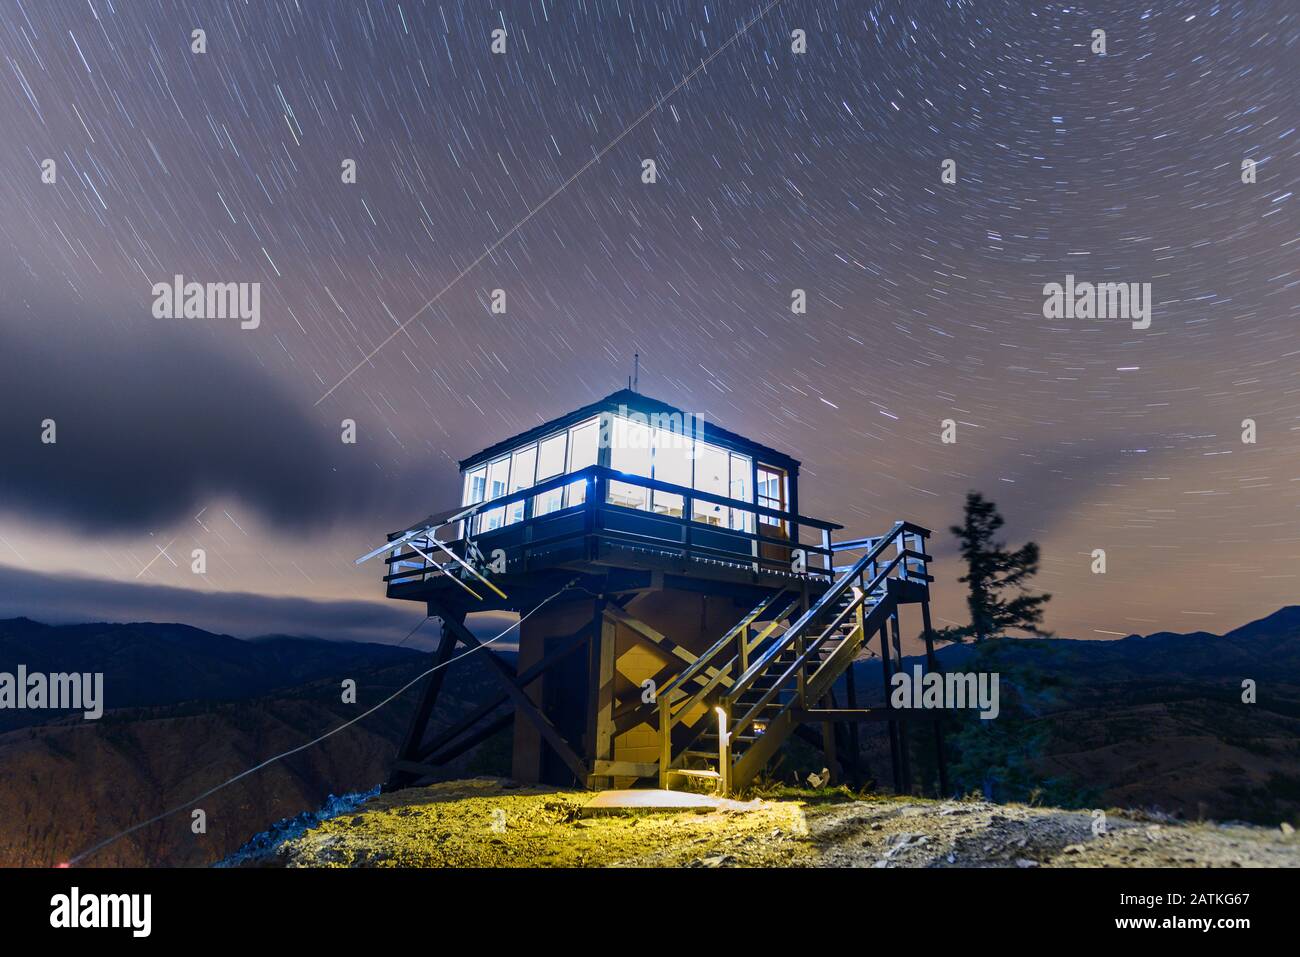 Fire Lookout Tower At Night With Stars Stock Photo